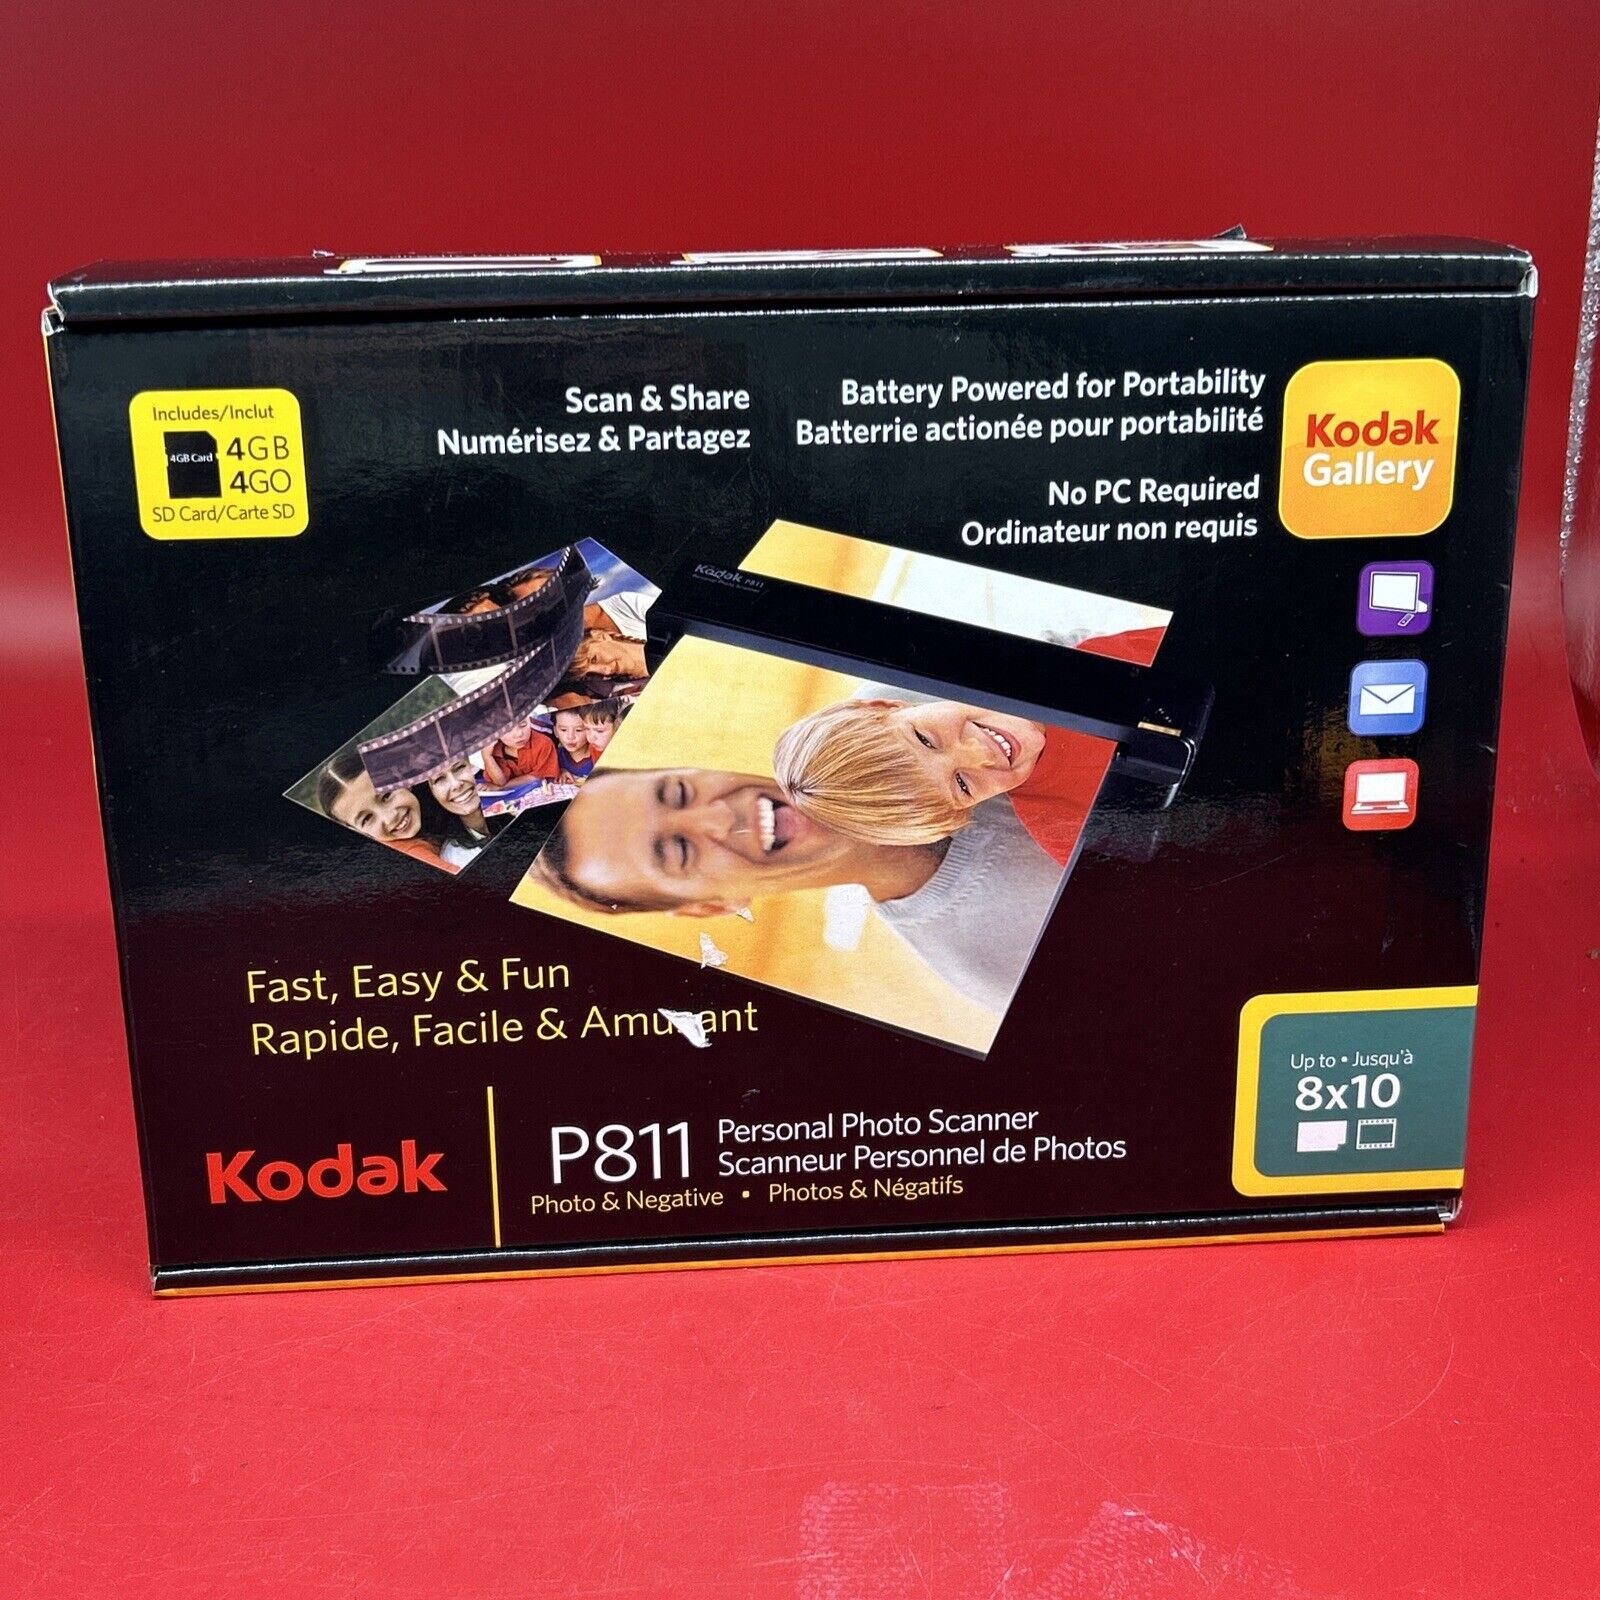 Kodak Gallery P811 Personal Photo Scanner - makes up to 8x10 #B1